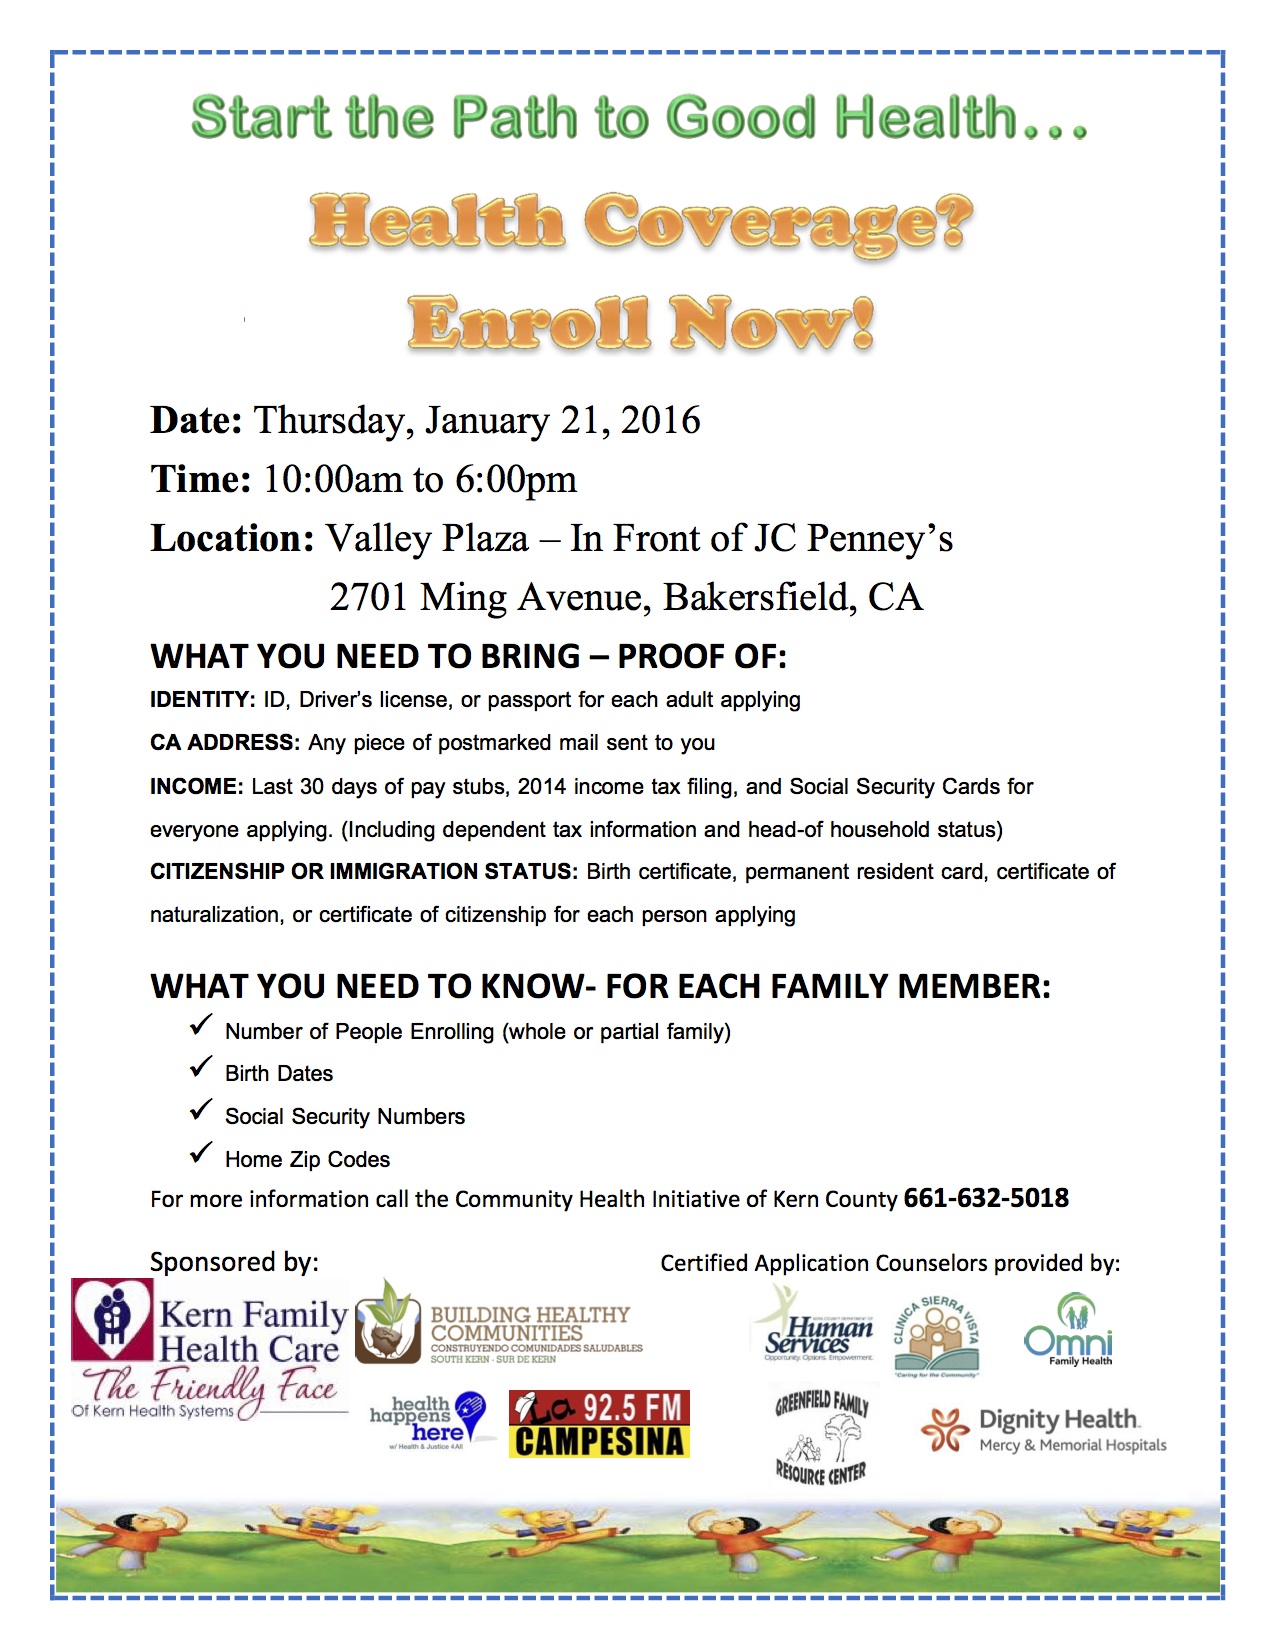 Valley Plaza Health Coverage Day 2016